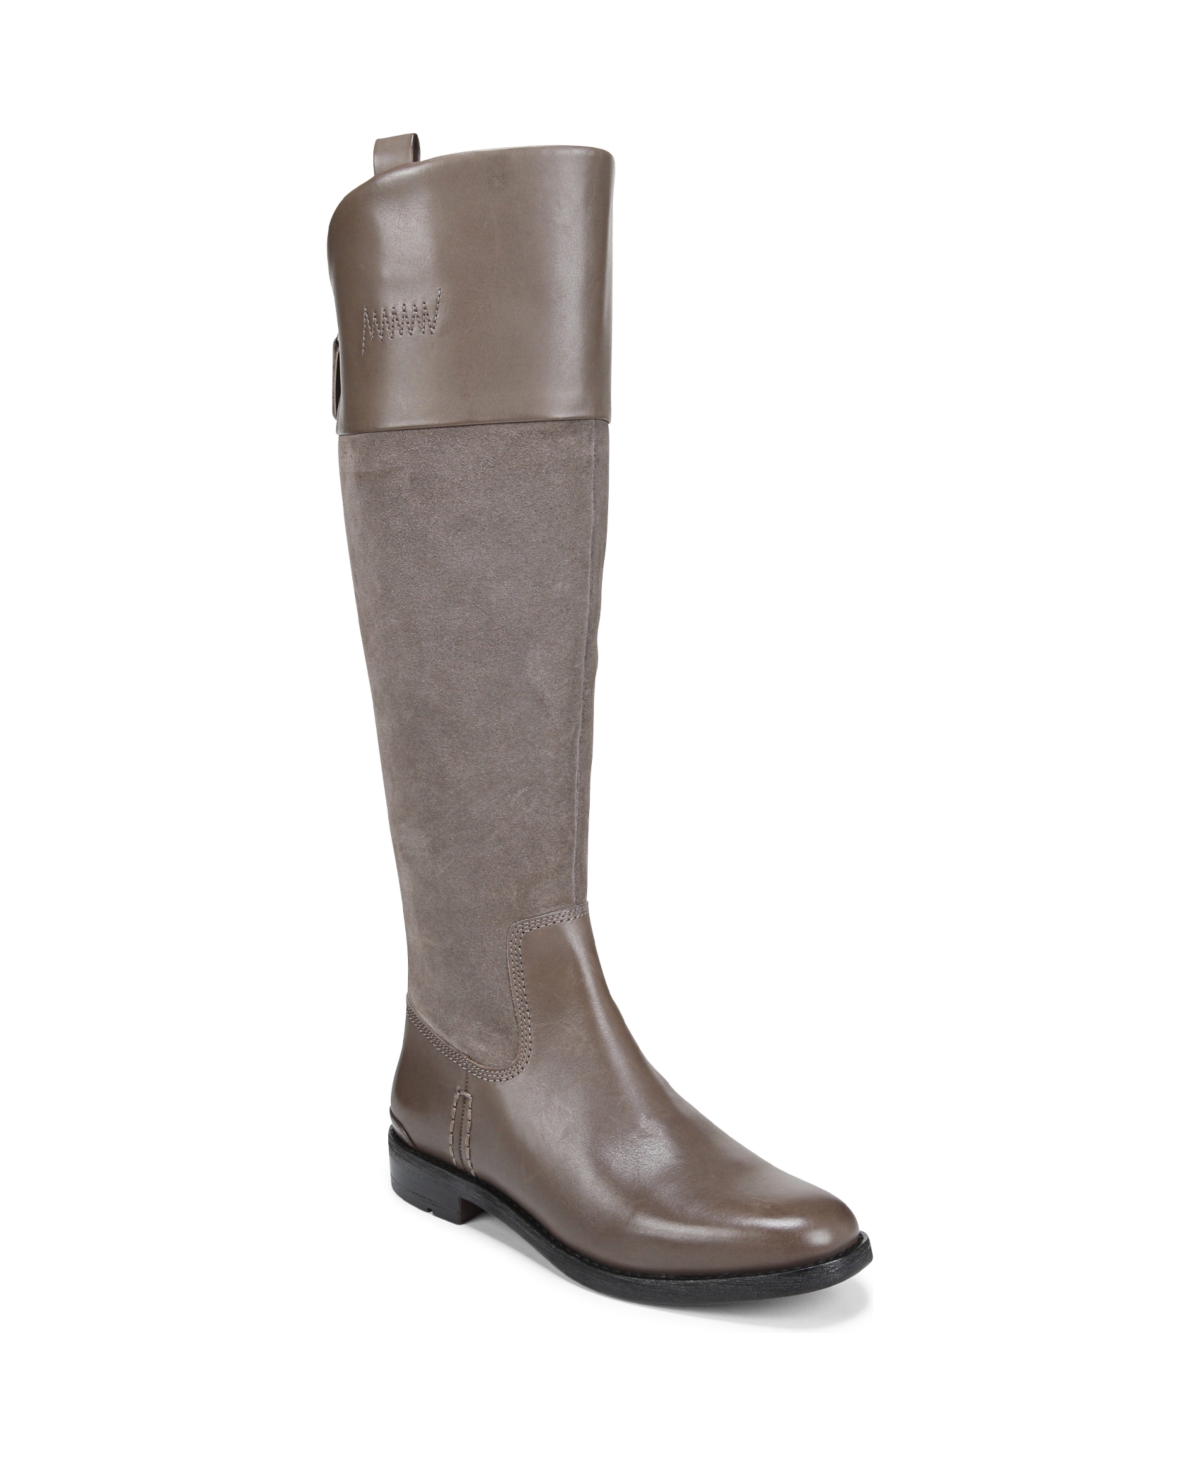 Meyer Knee High Riding Boots - Dark Brown Leather